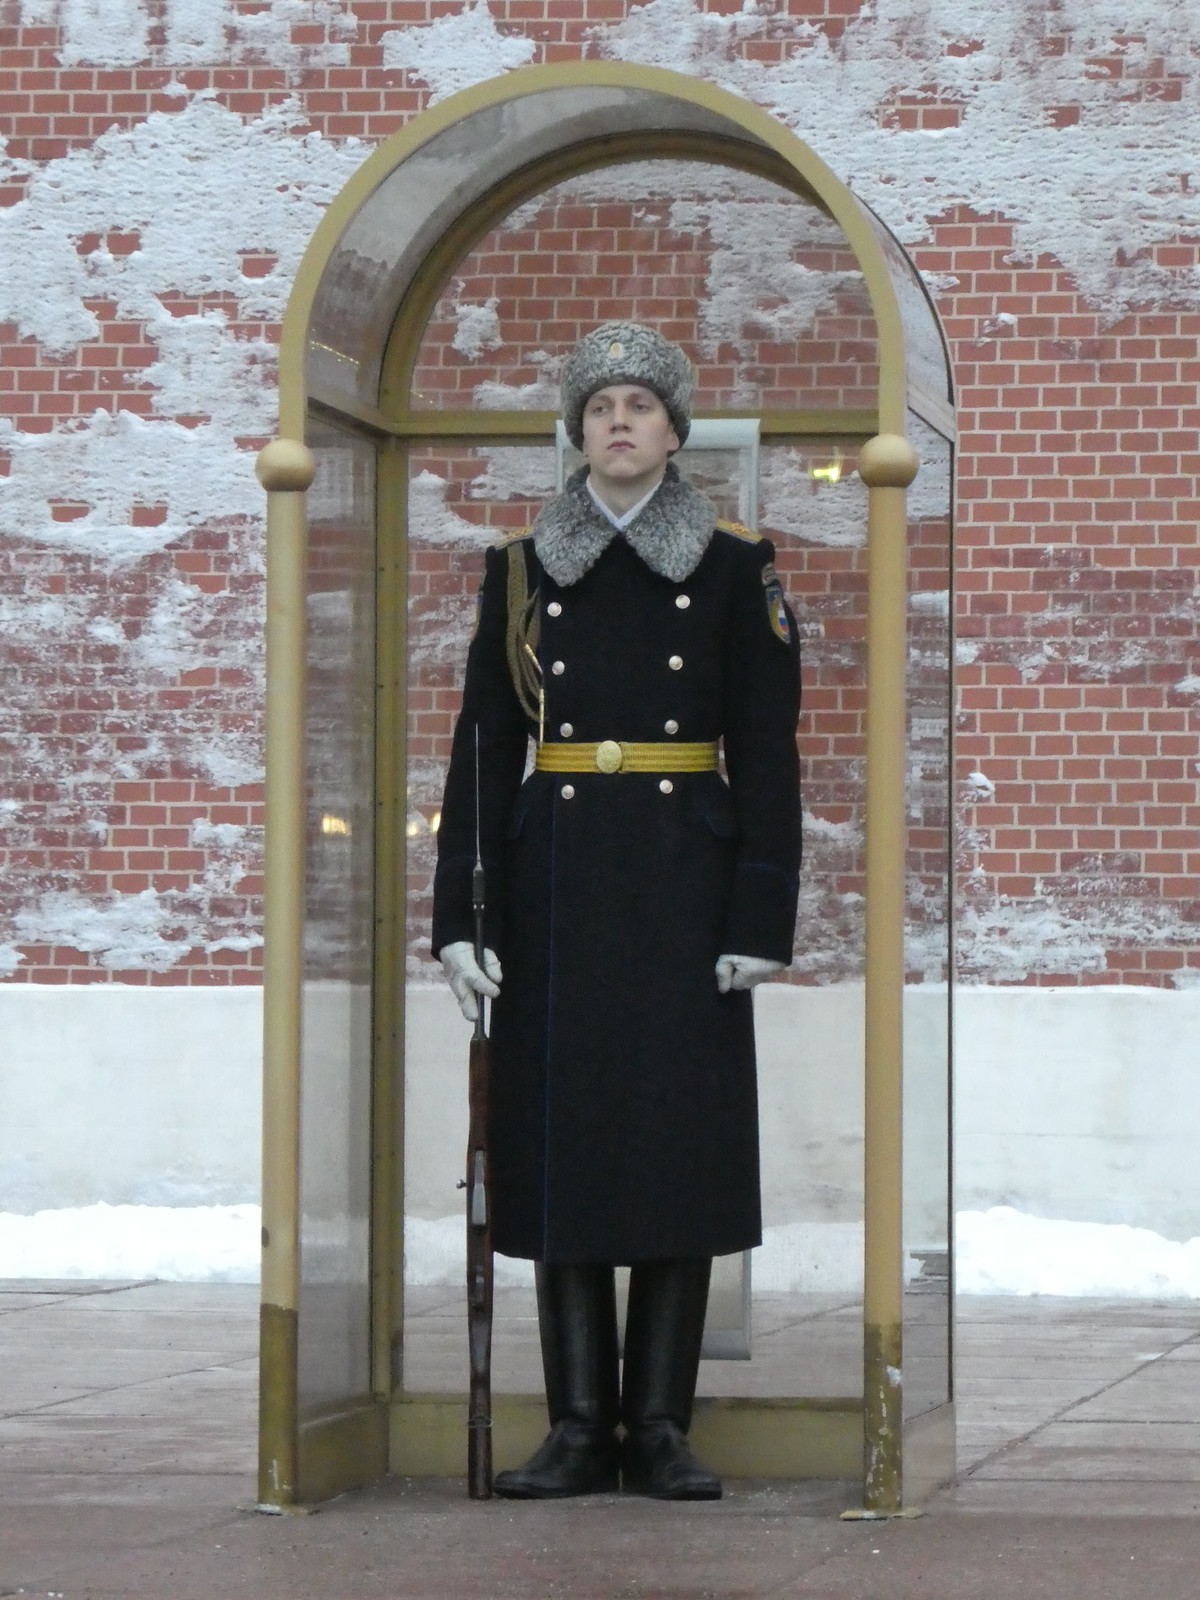 The tomb of the unknown soldier, Moscow